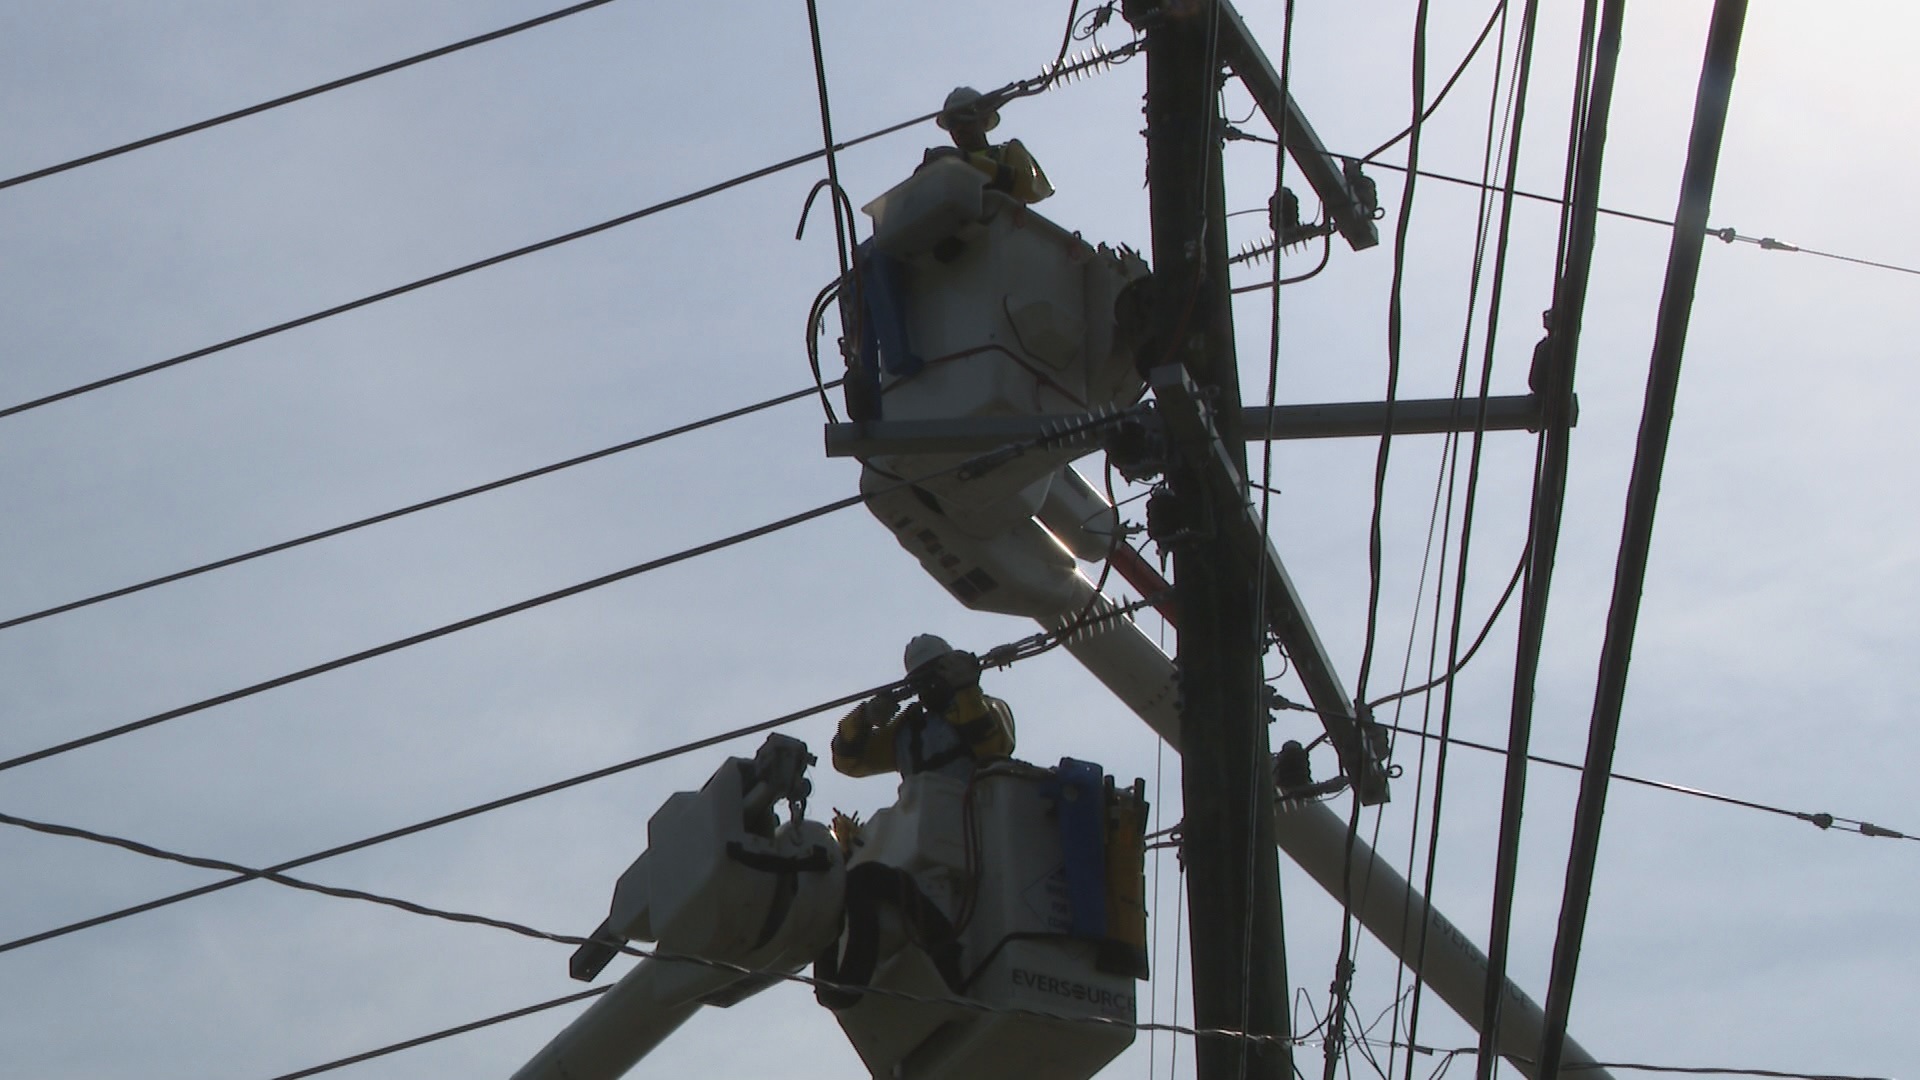 Utility companies said this time of year is when the grid gets tested and peak use of electricity could cause a temporary outage.